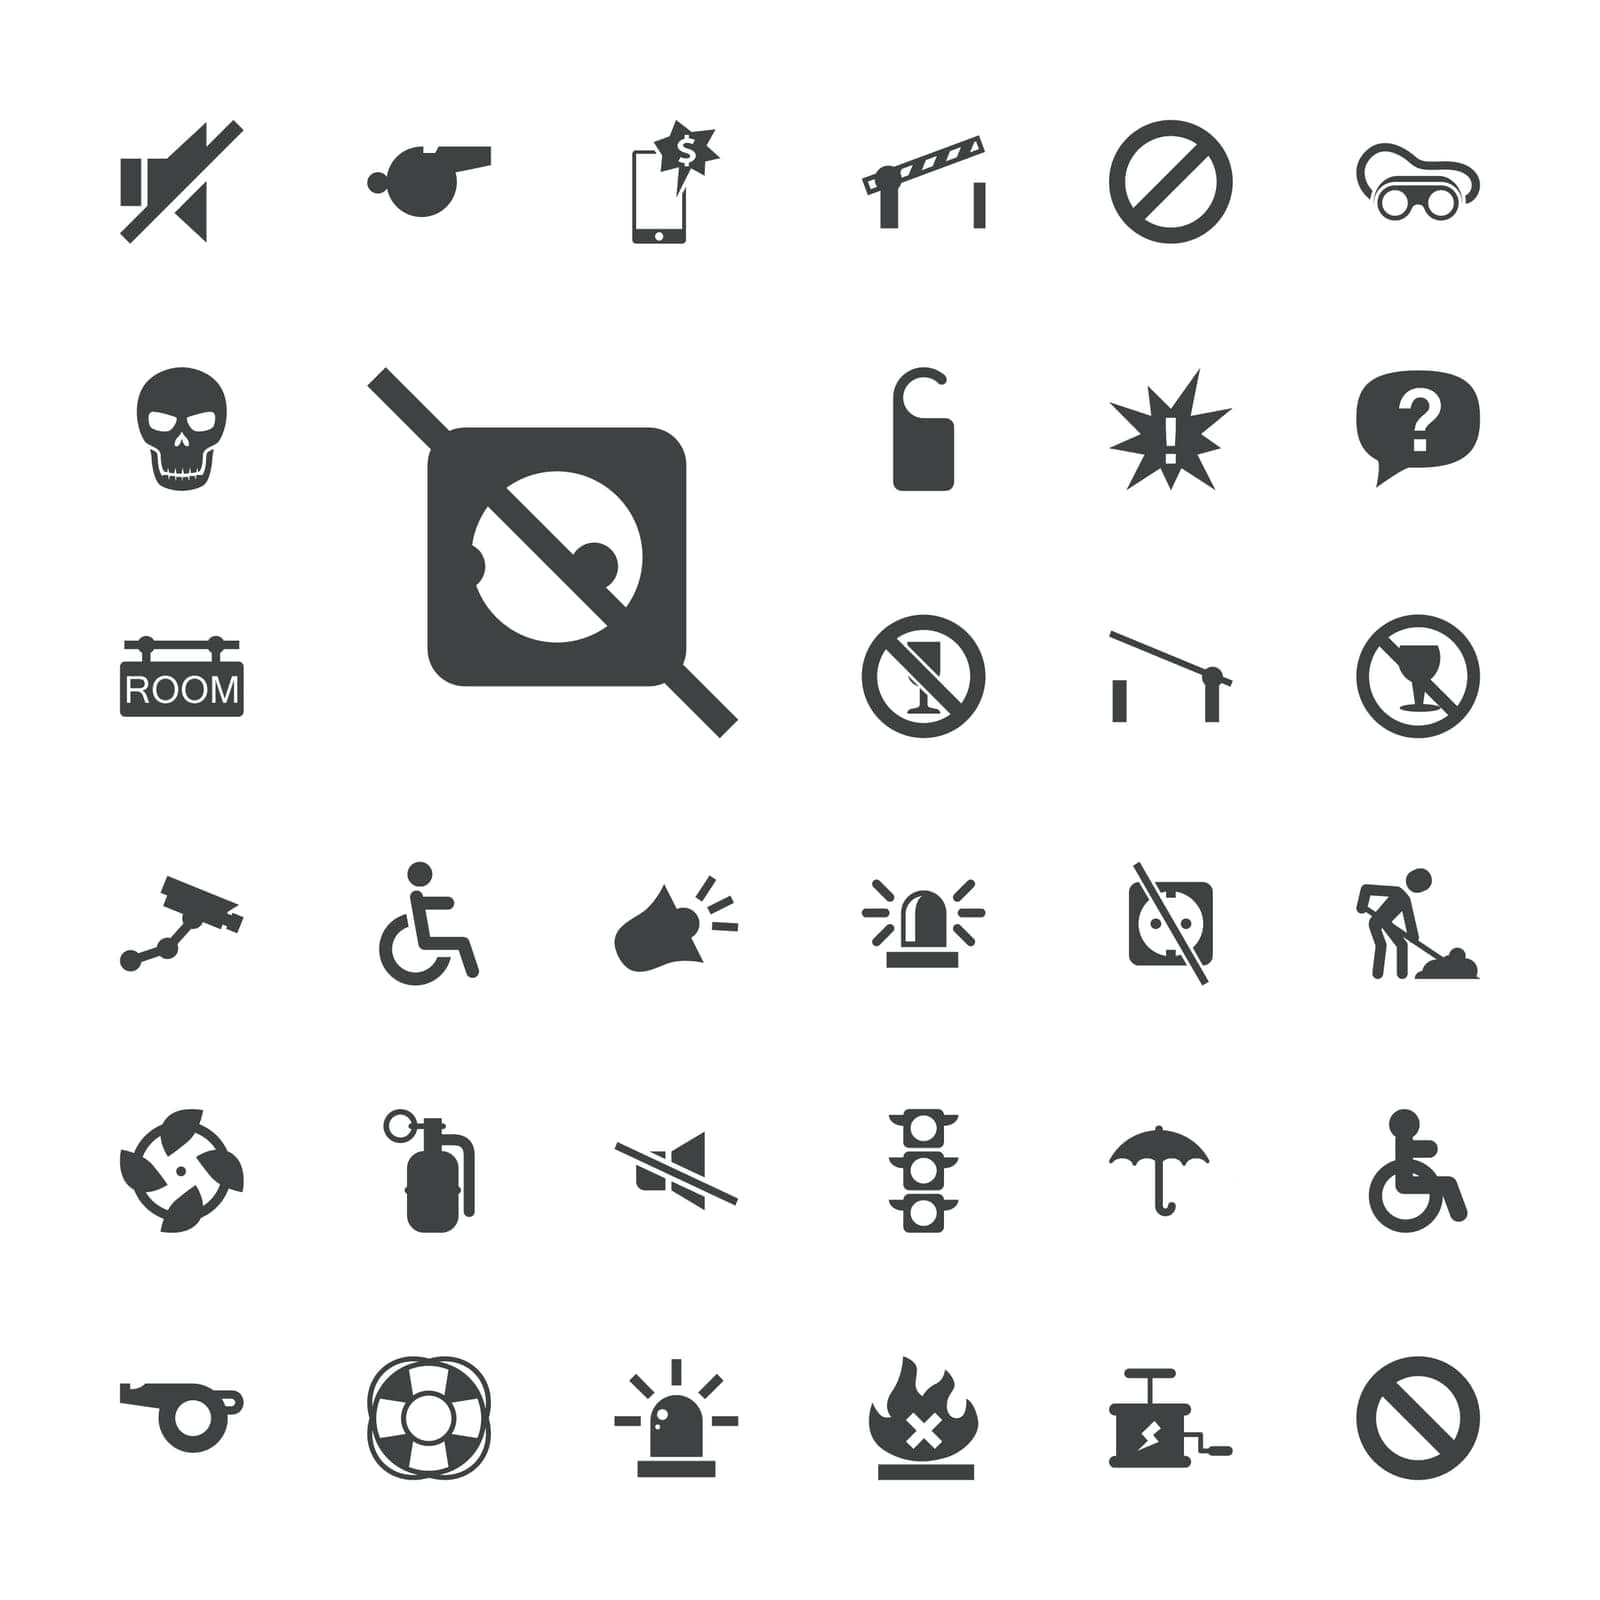 symbol,no,siren,sound,icon,exclamation,do,glasses,security,fan,not,dynamite,barrier,road,disturb,fire,warning,disabled,vector,man,tag,skull,cargo,camera,traffic,alcohol,set,welding,whistle,dry,digging,message,drink,room,important,light,prohibited,keep,plug by ogqcorp